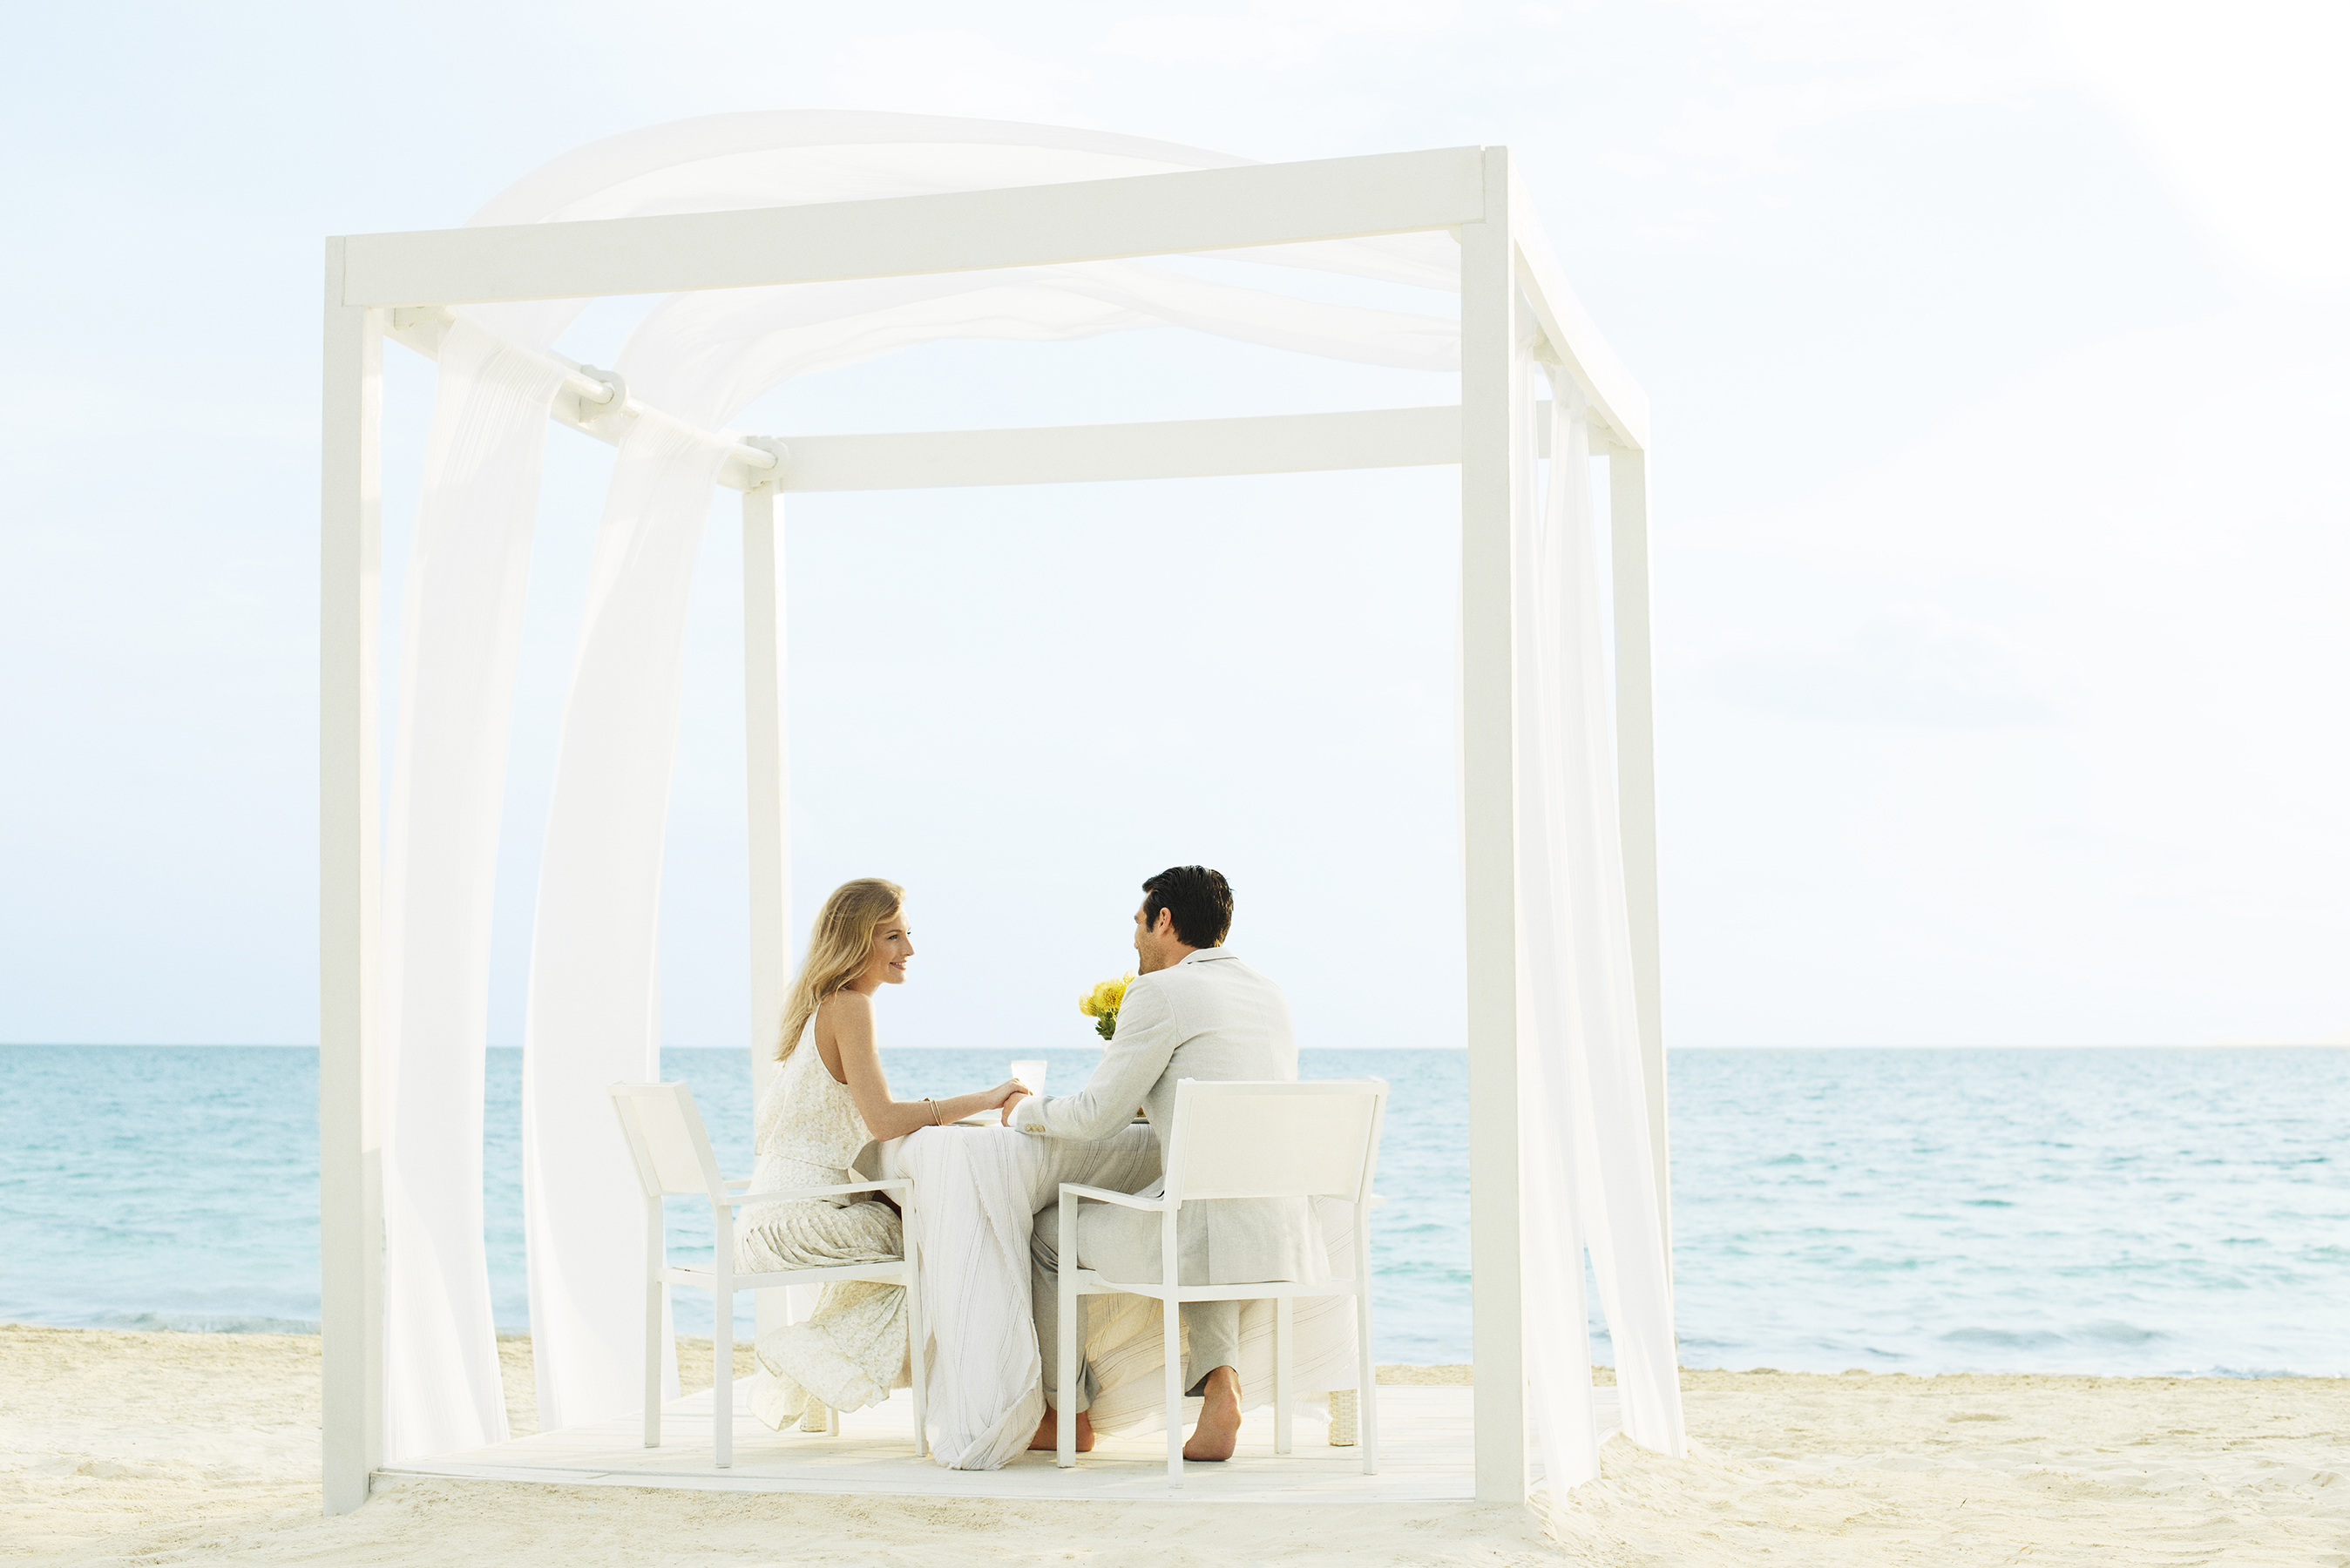 Reserve a private meal on the beach for outdoor exclsuive dining for couples